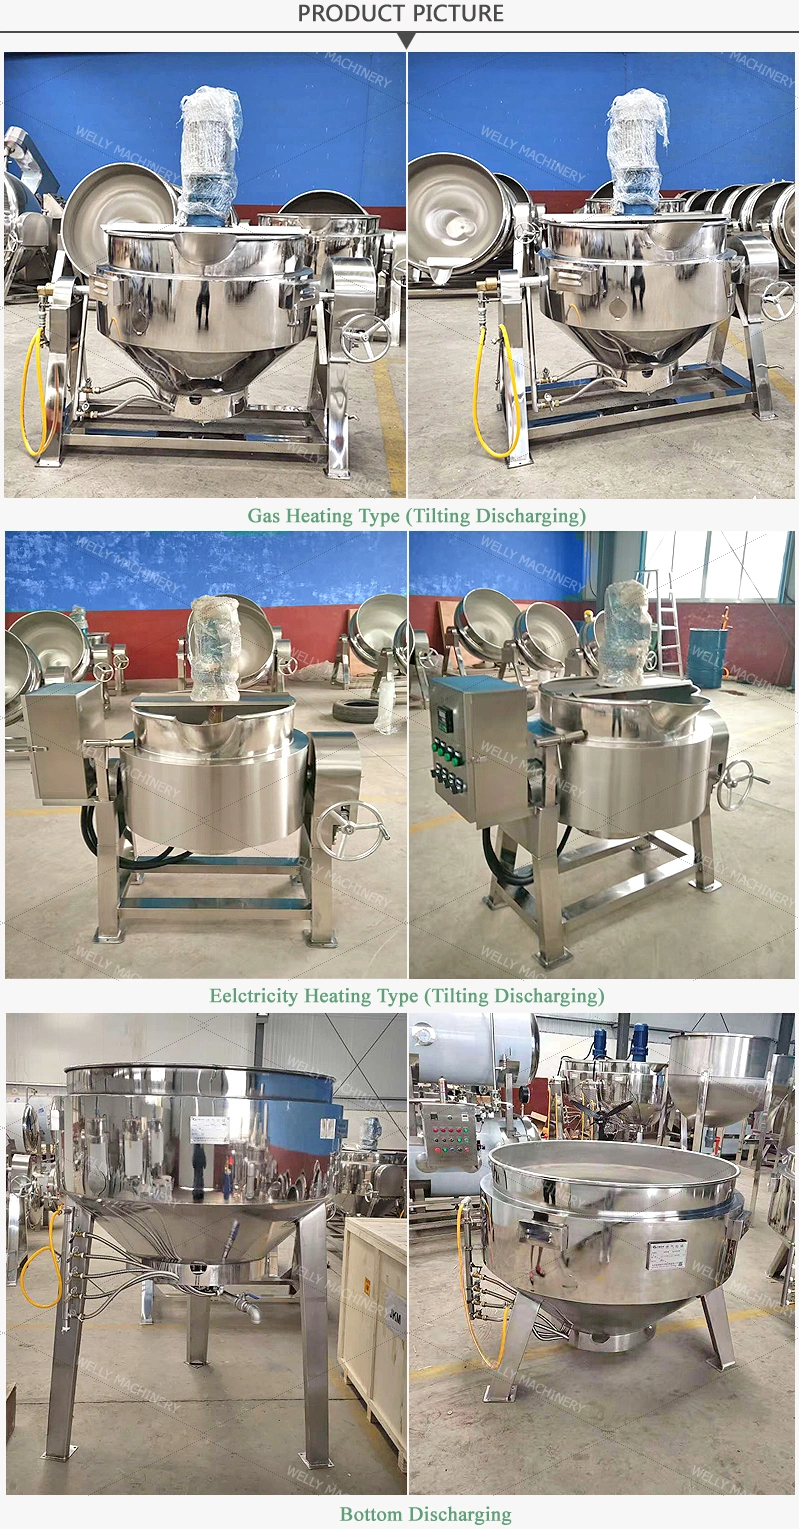 Gas Steam Jacketed Kettle Electric Cooking Pot Equipped with Mixer